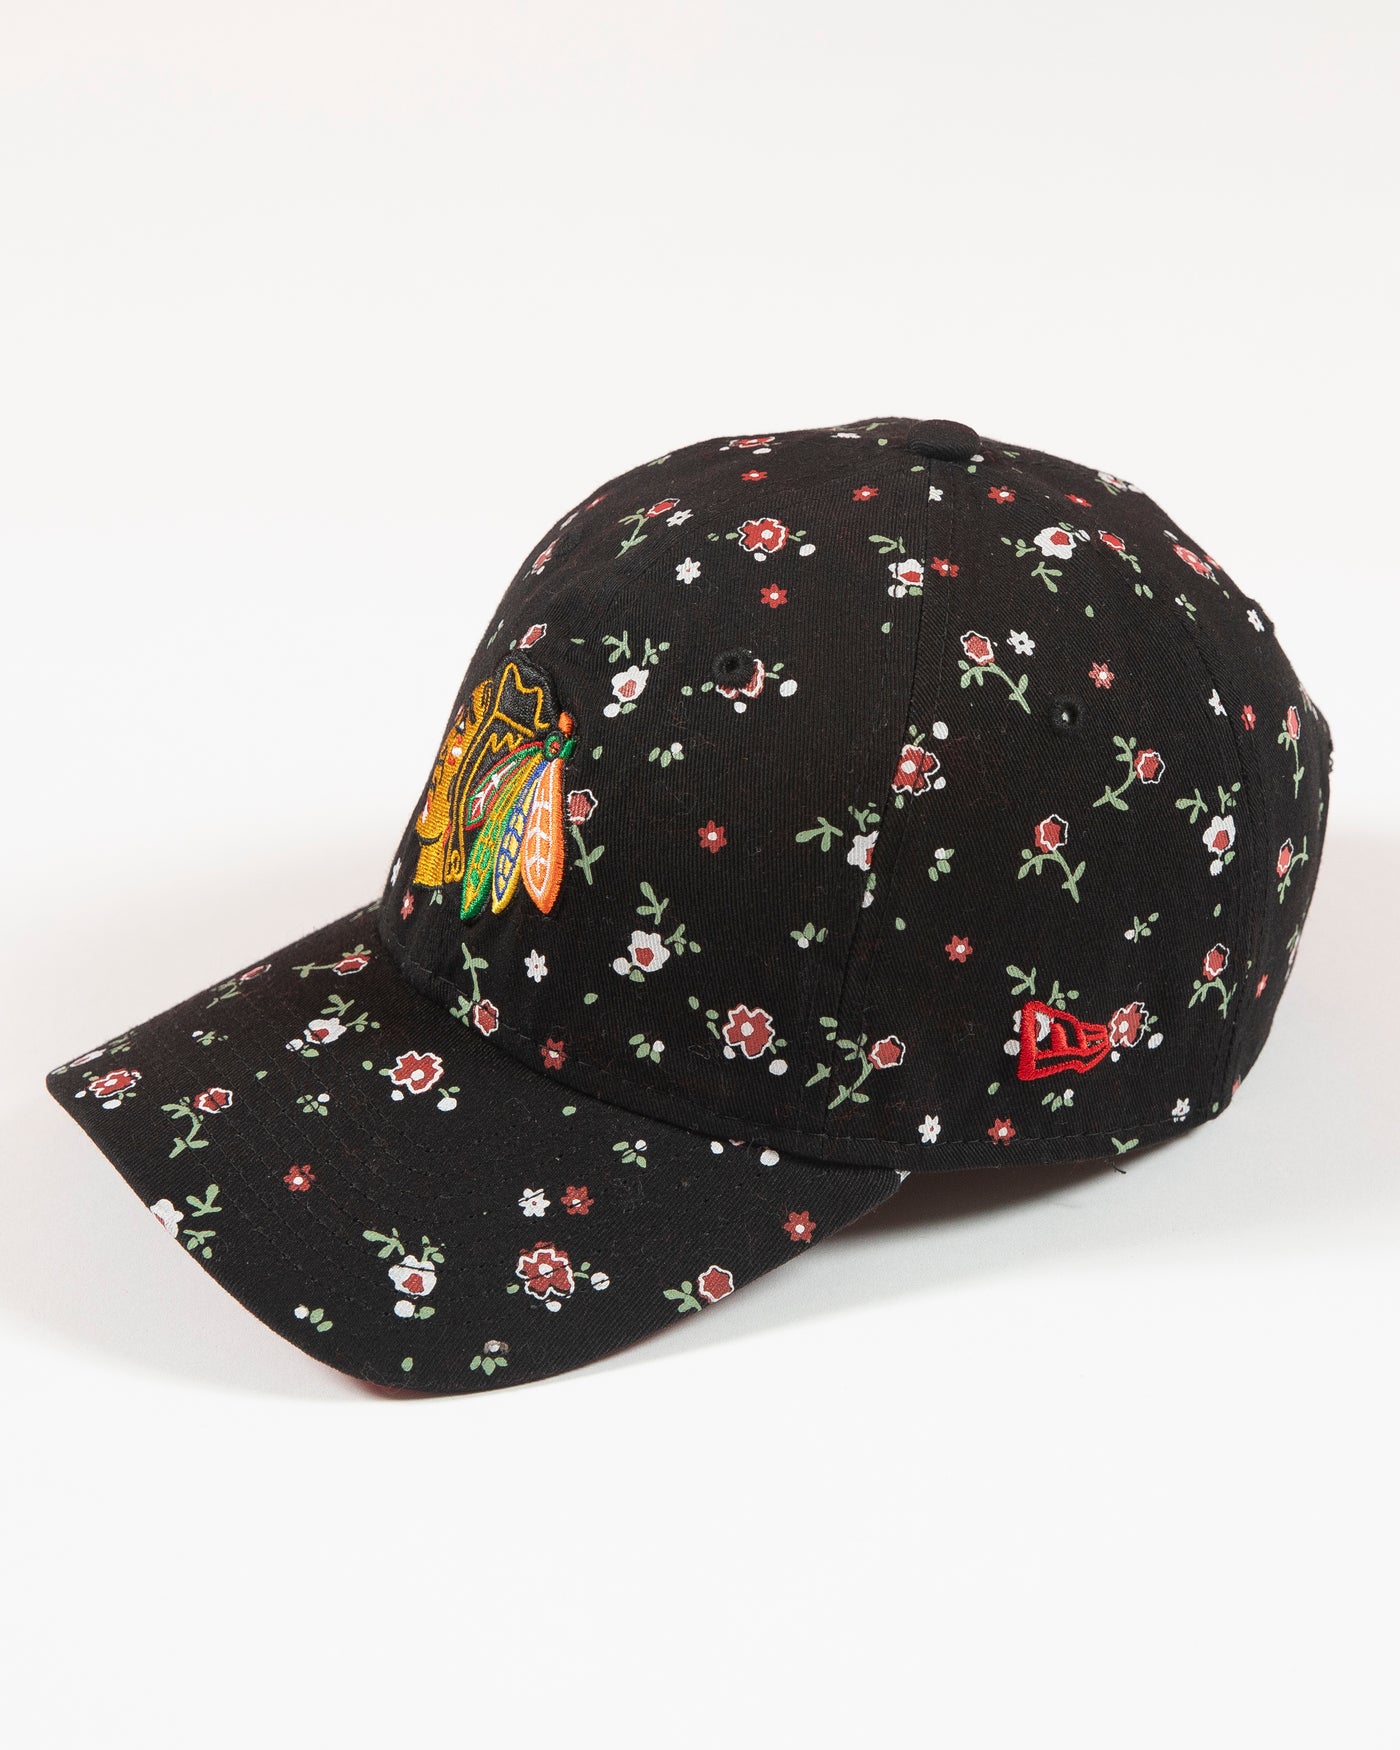 Black floral print New Era women's cap with Chicago Blackhawks primary logo embroidered on front - left angle lay flat